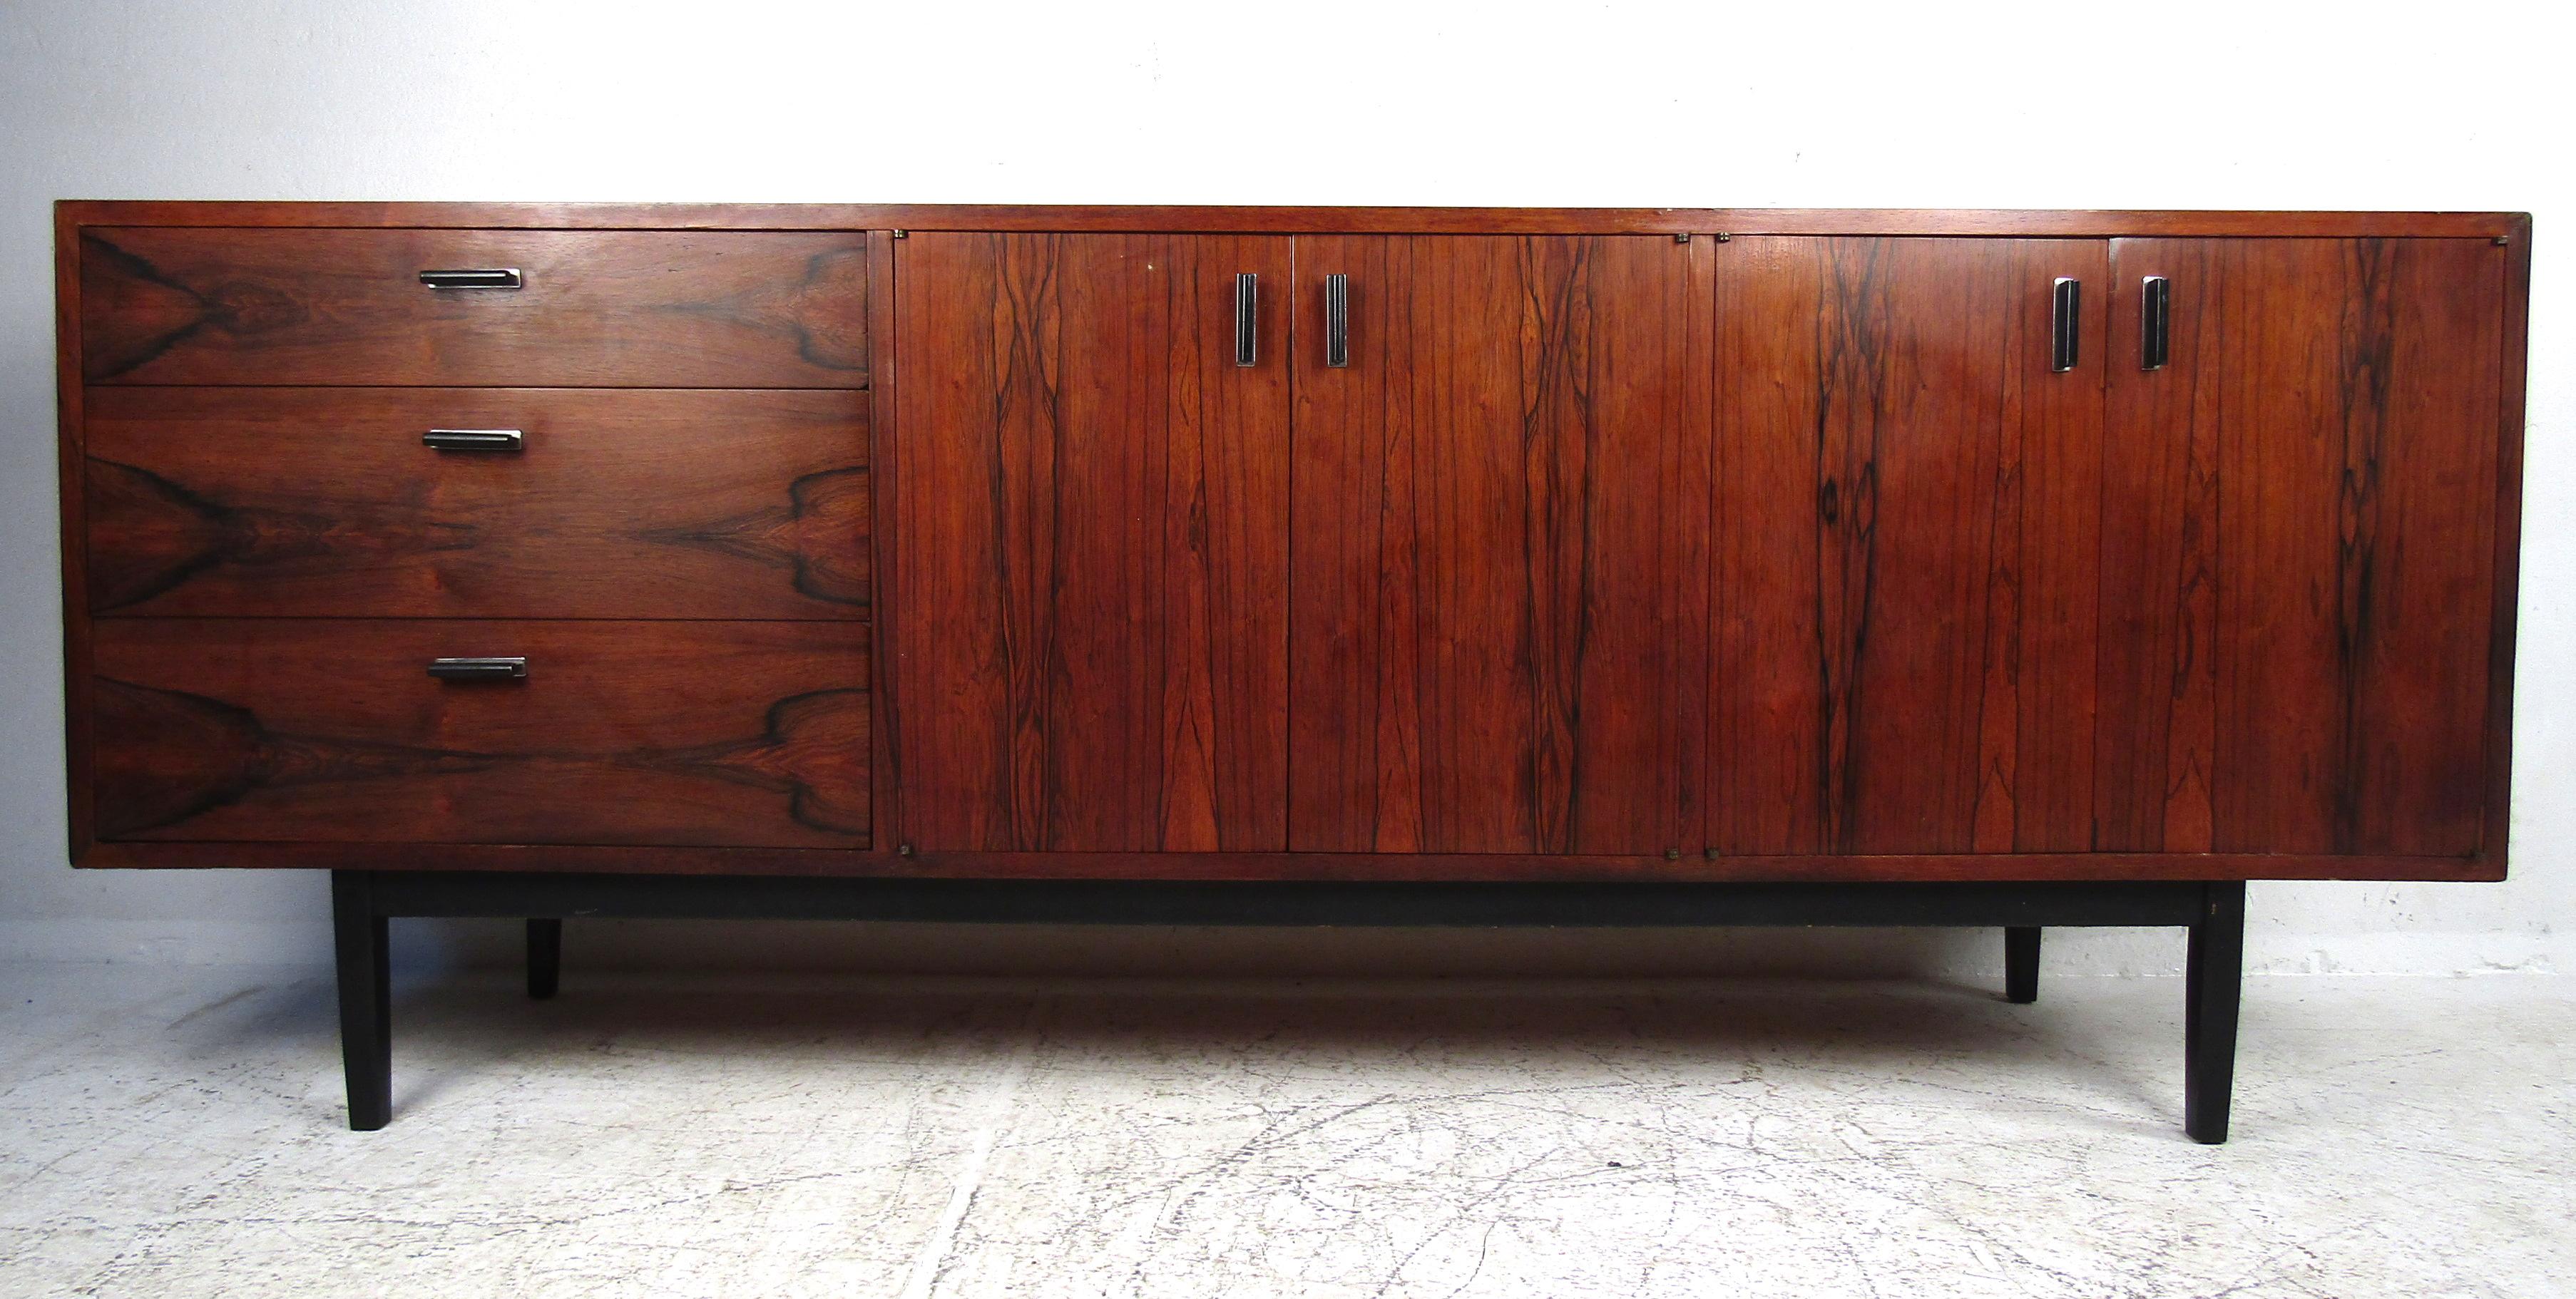 This stunning vintage modern credenza features a beautiful rosewood front with two cabinet doors and three hefty drawers. Ample storage is provided by two large compartments with shelves and drawers. The unusual sculpted door handles and black